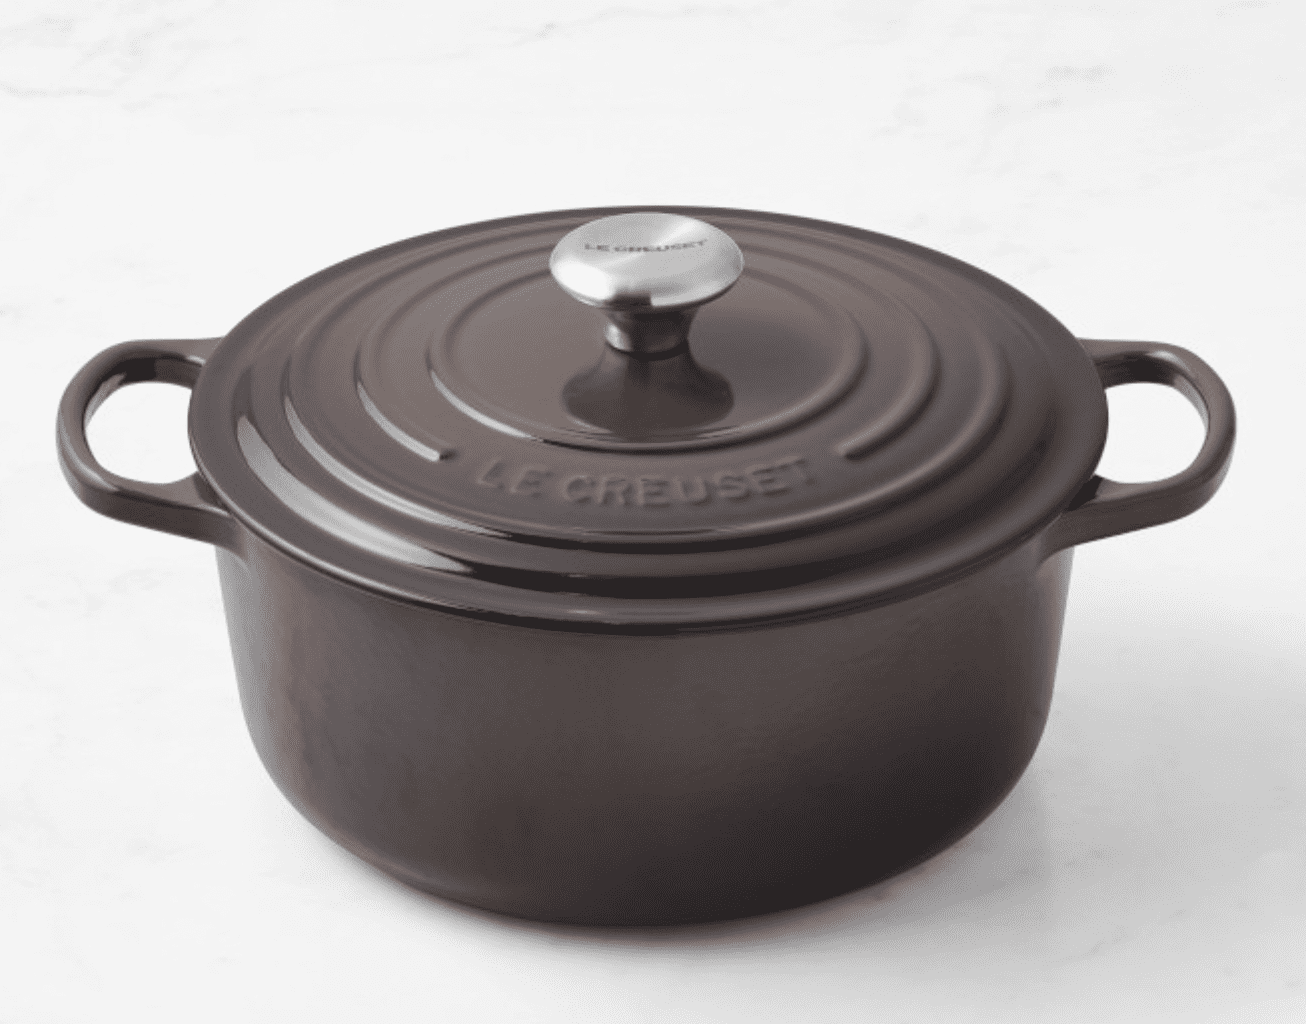 https://cdn.apartmenttherapy.info/image/upload/v1675274728/commerce/LC-Signature-Round-Dutch-Oven.png